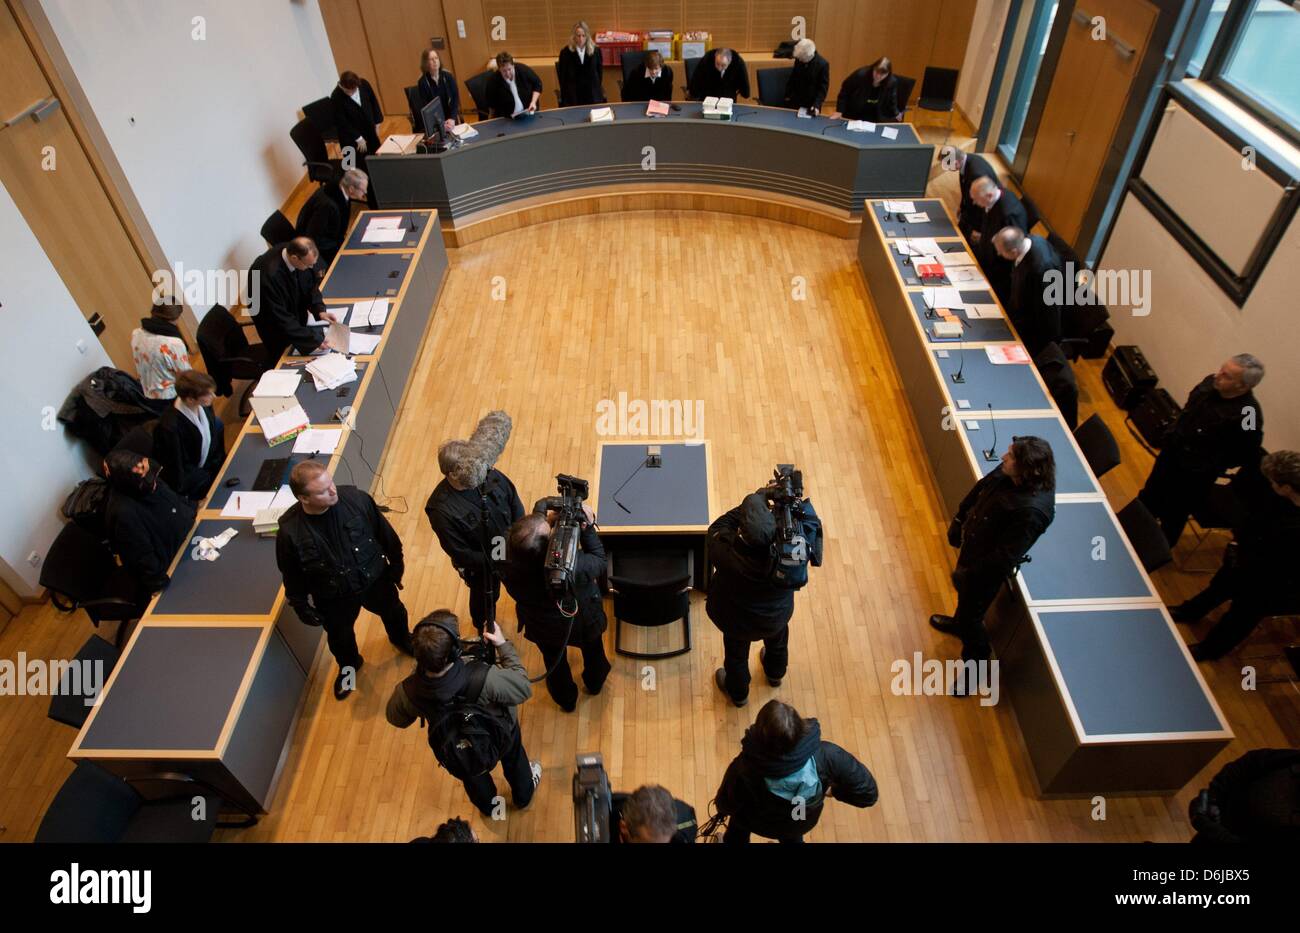 View to the court room prior to the trial on the death of Oury Jalloh at the Regional Court in Magdeburg, Germany, 13 March 2012. The trial concerns the death of the 23 year old asylum seeker Oury Jalloh from Sierra Leone who died during a fire in a police cell in Dessau. Photo: JENS WOLF Stock Photo